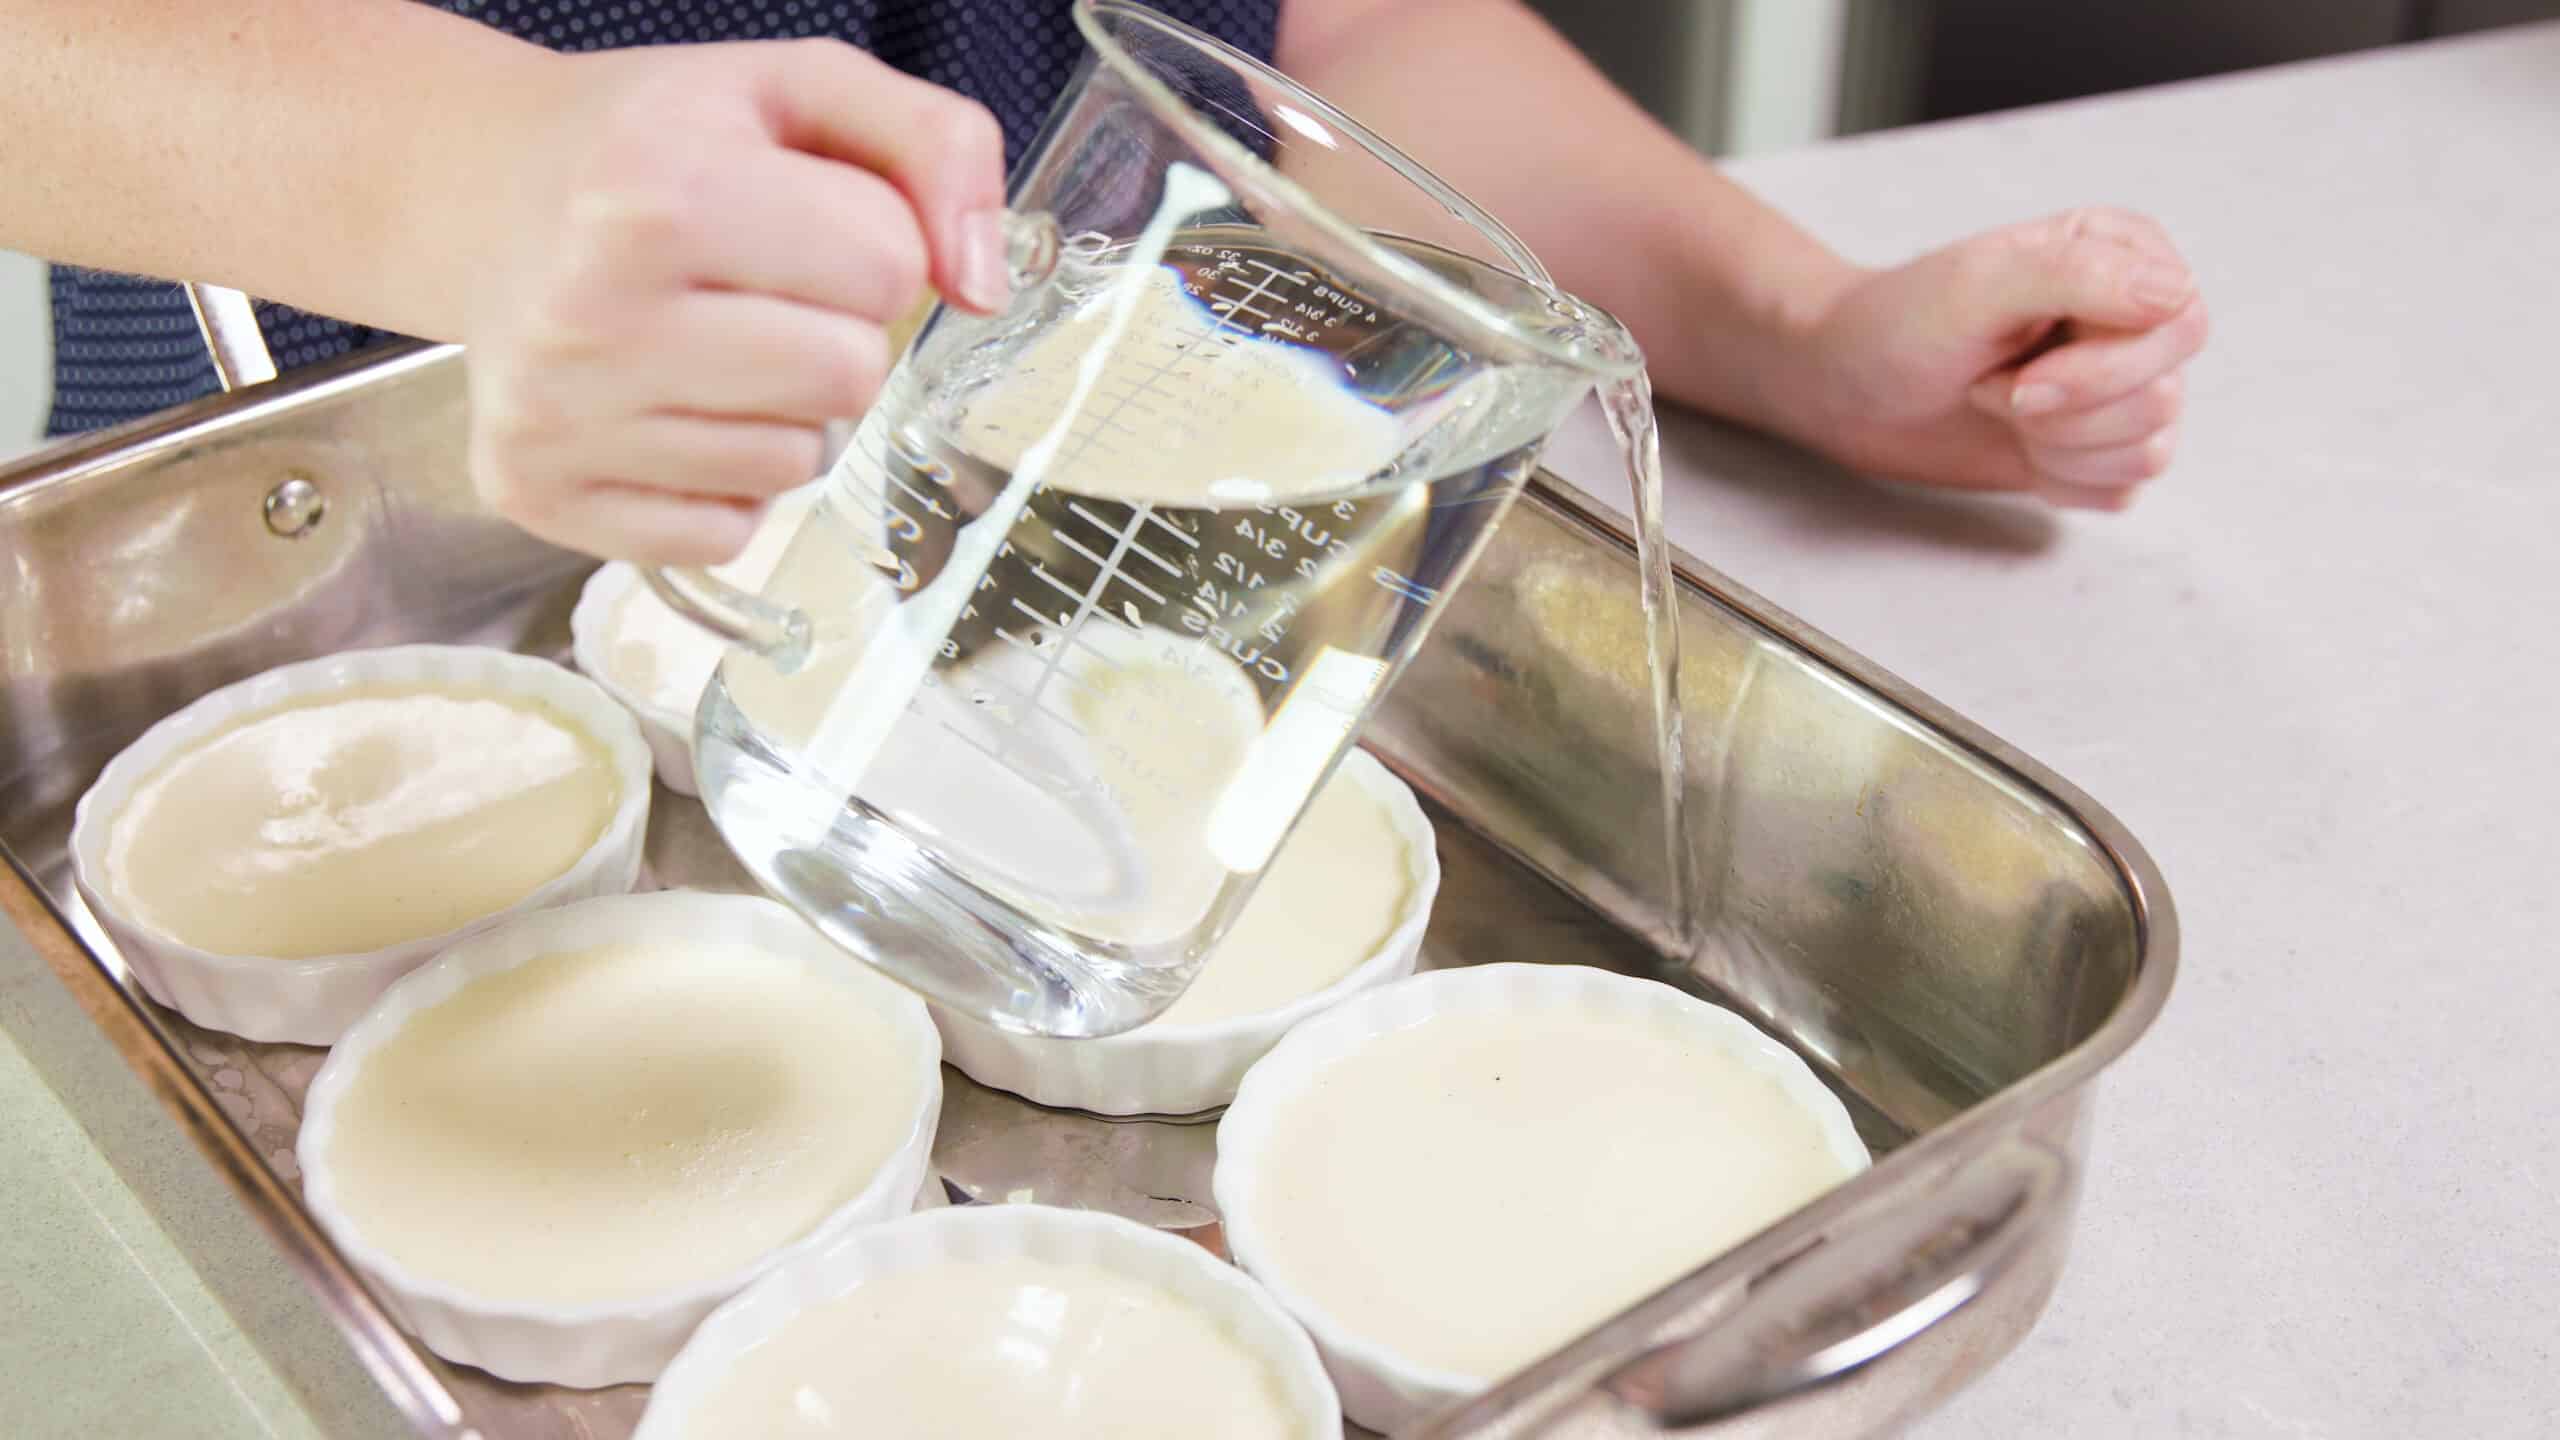 Angled view of a large metal hotel pan filled with six white glass ramekins filled with strained egg mixture and a large clear glass measuring cup pouring water into the spaces between each ramekin.